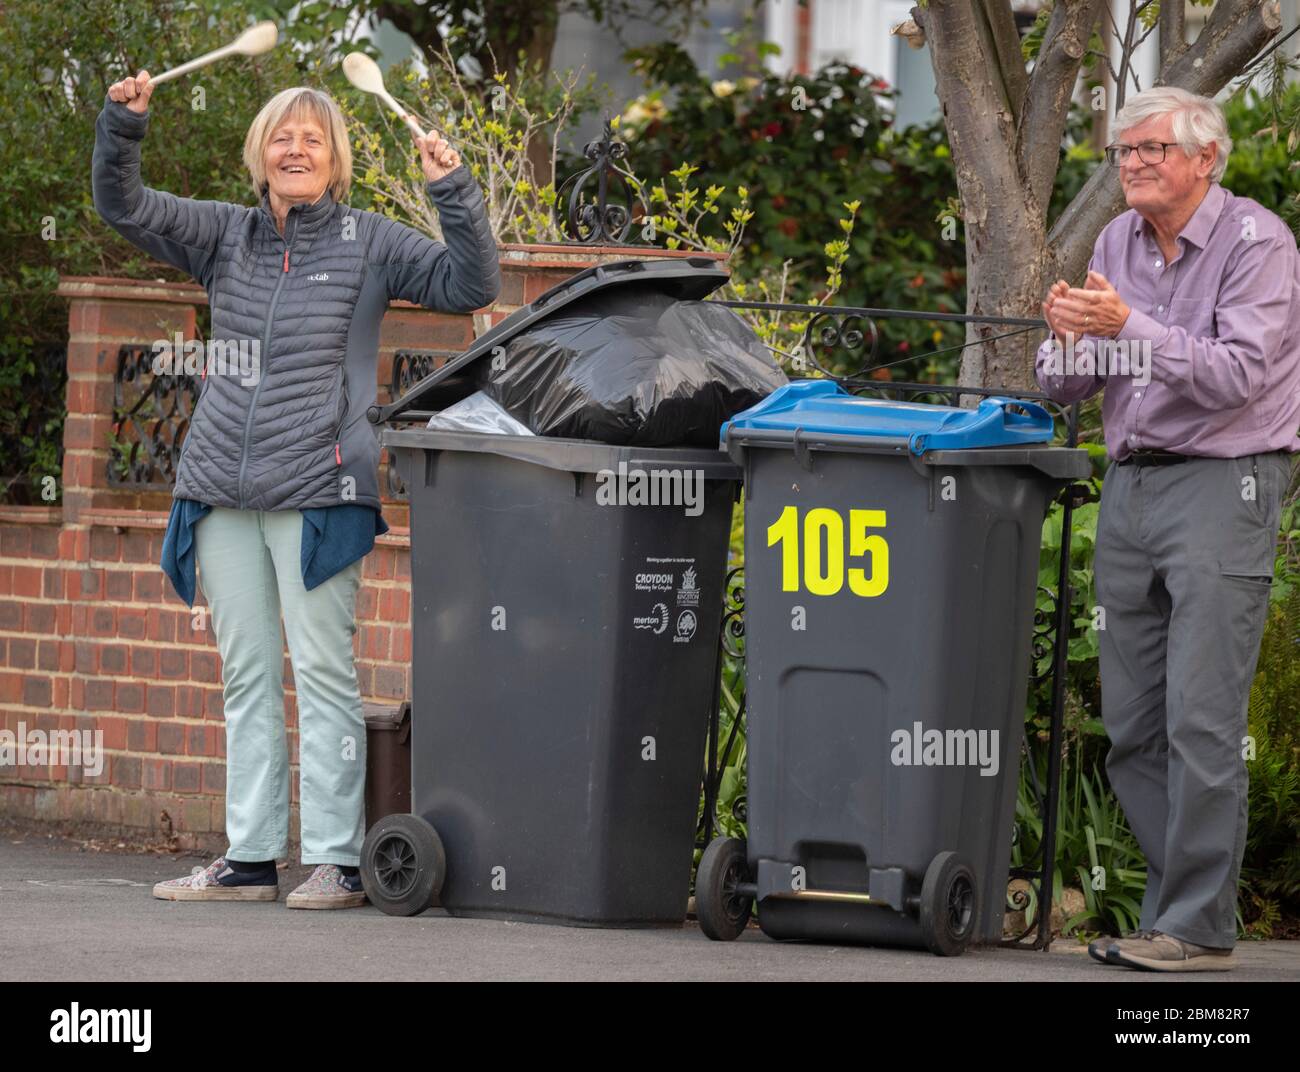 Merton Park, London, UK. 7 May 2020. Residents and neighbours of a leafy south London street clap for NHS and Carers at 8.00pm on a warm evening on day 45 of the Coronavirus lockdown. Credit: Malcolm Park/Alamy Live News. Stock Photo